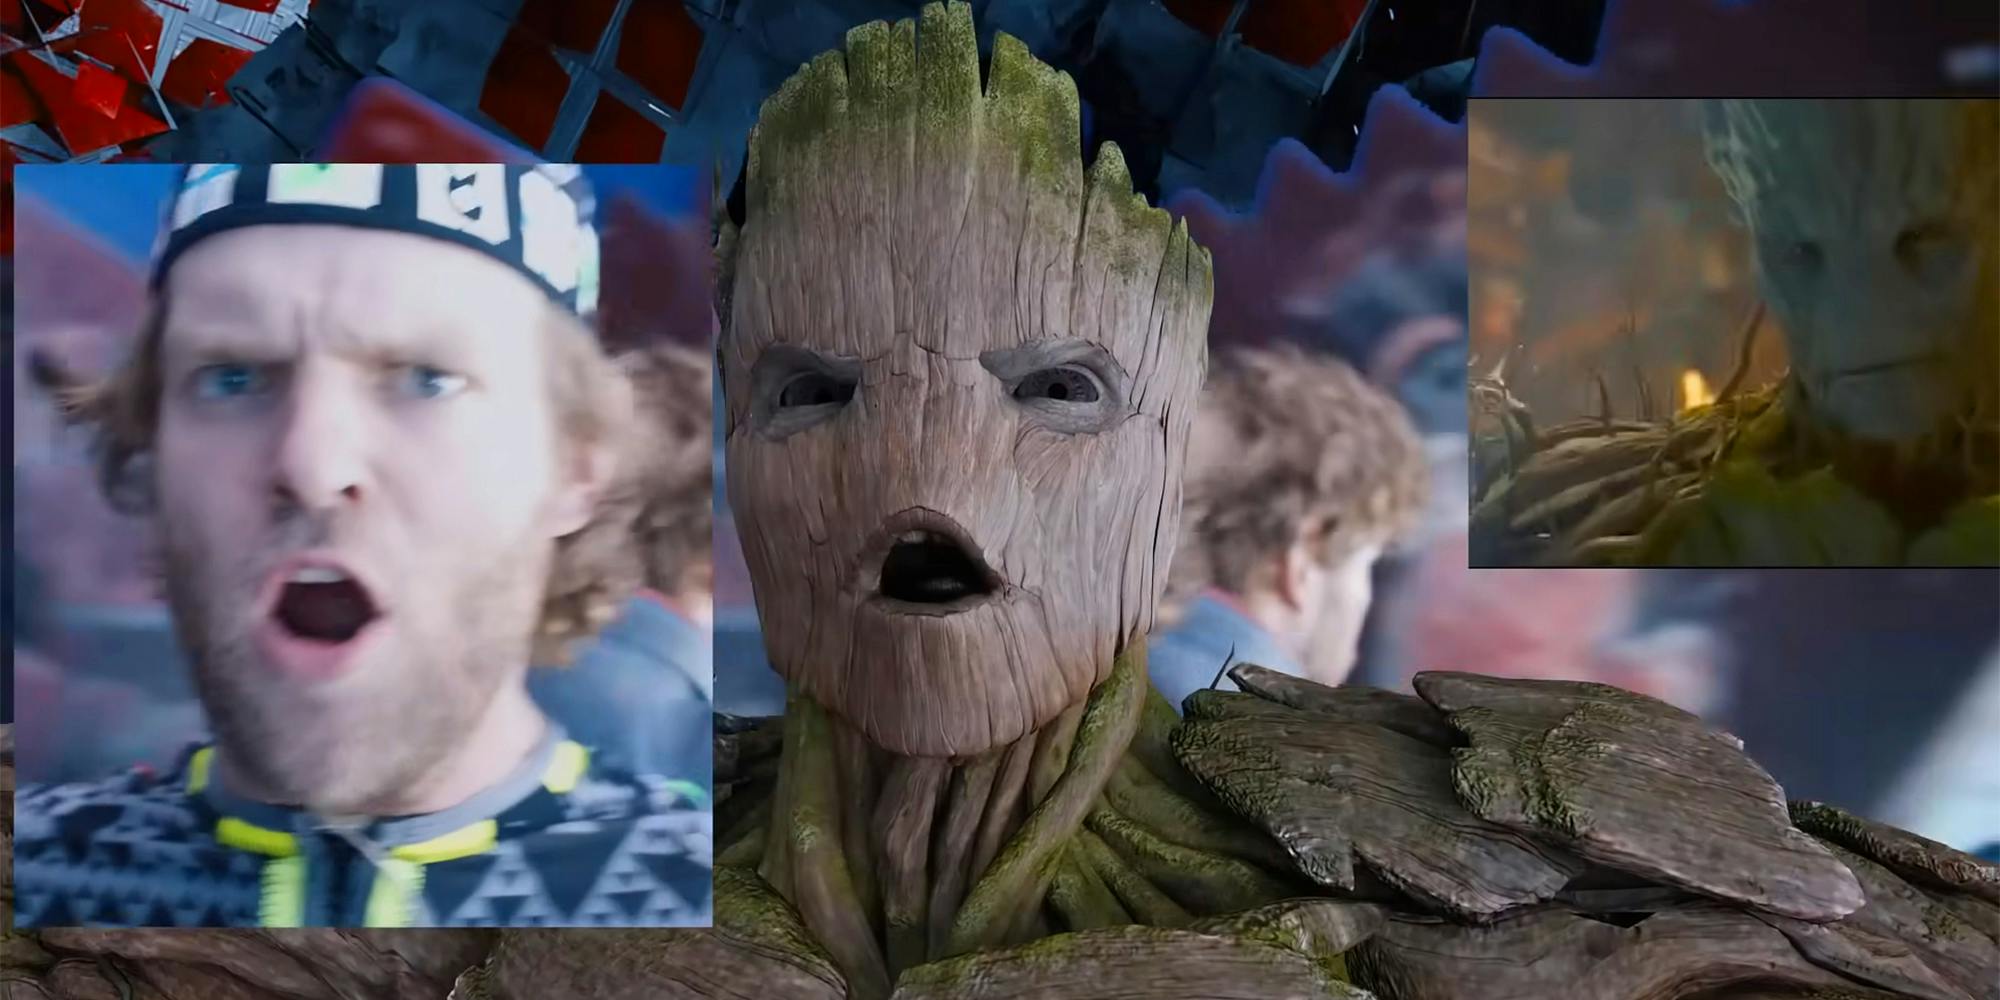 actor wearing vfx suit (inset) Groot from Guardians of the Galaxy